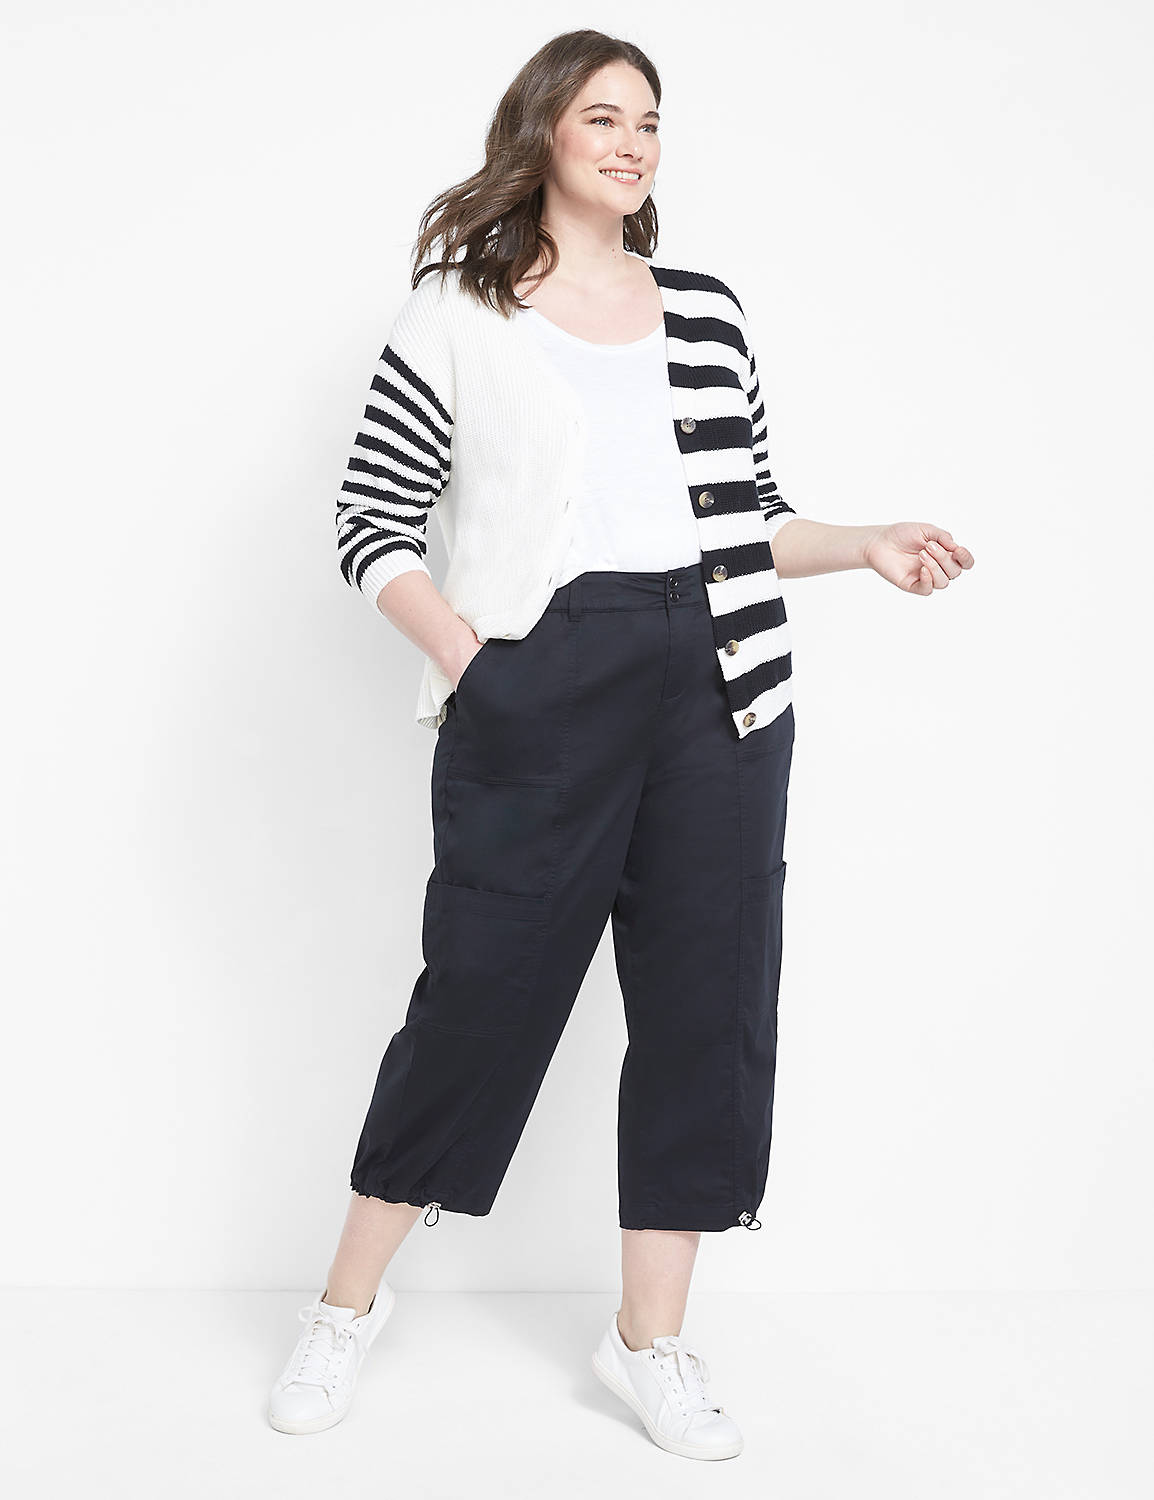 Soften Sateen Jogger 1125361 Product Image 3